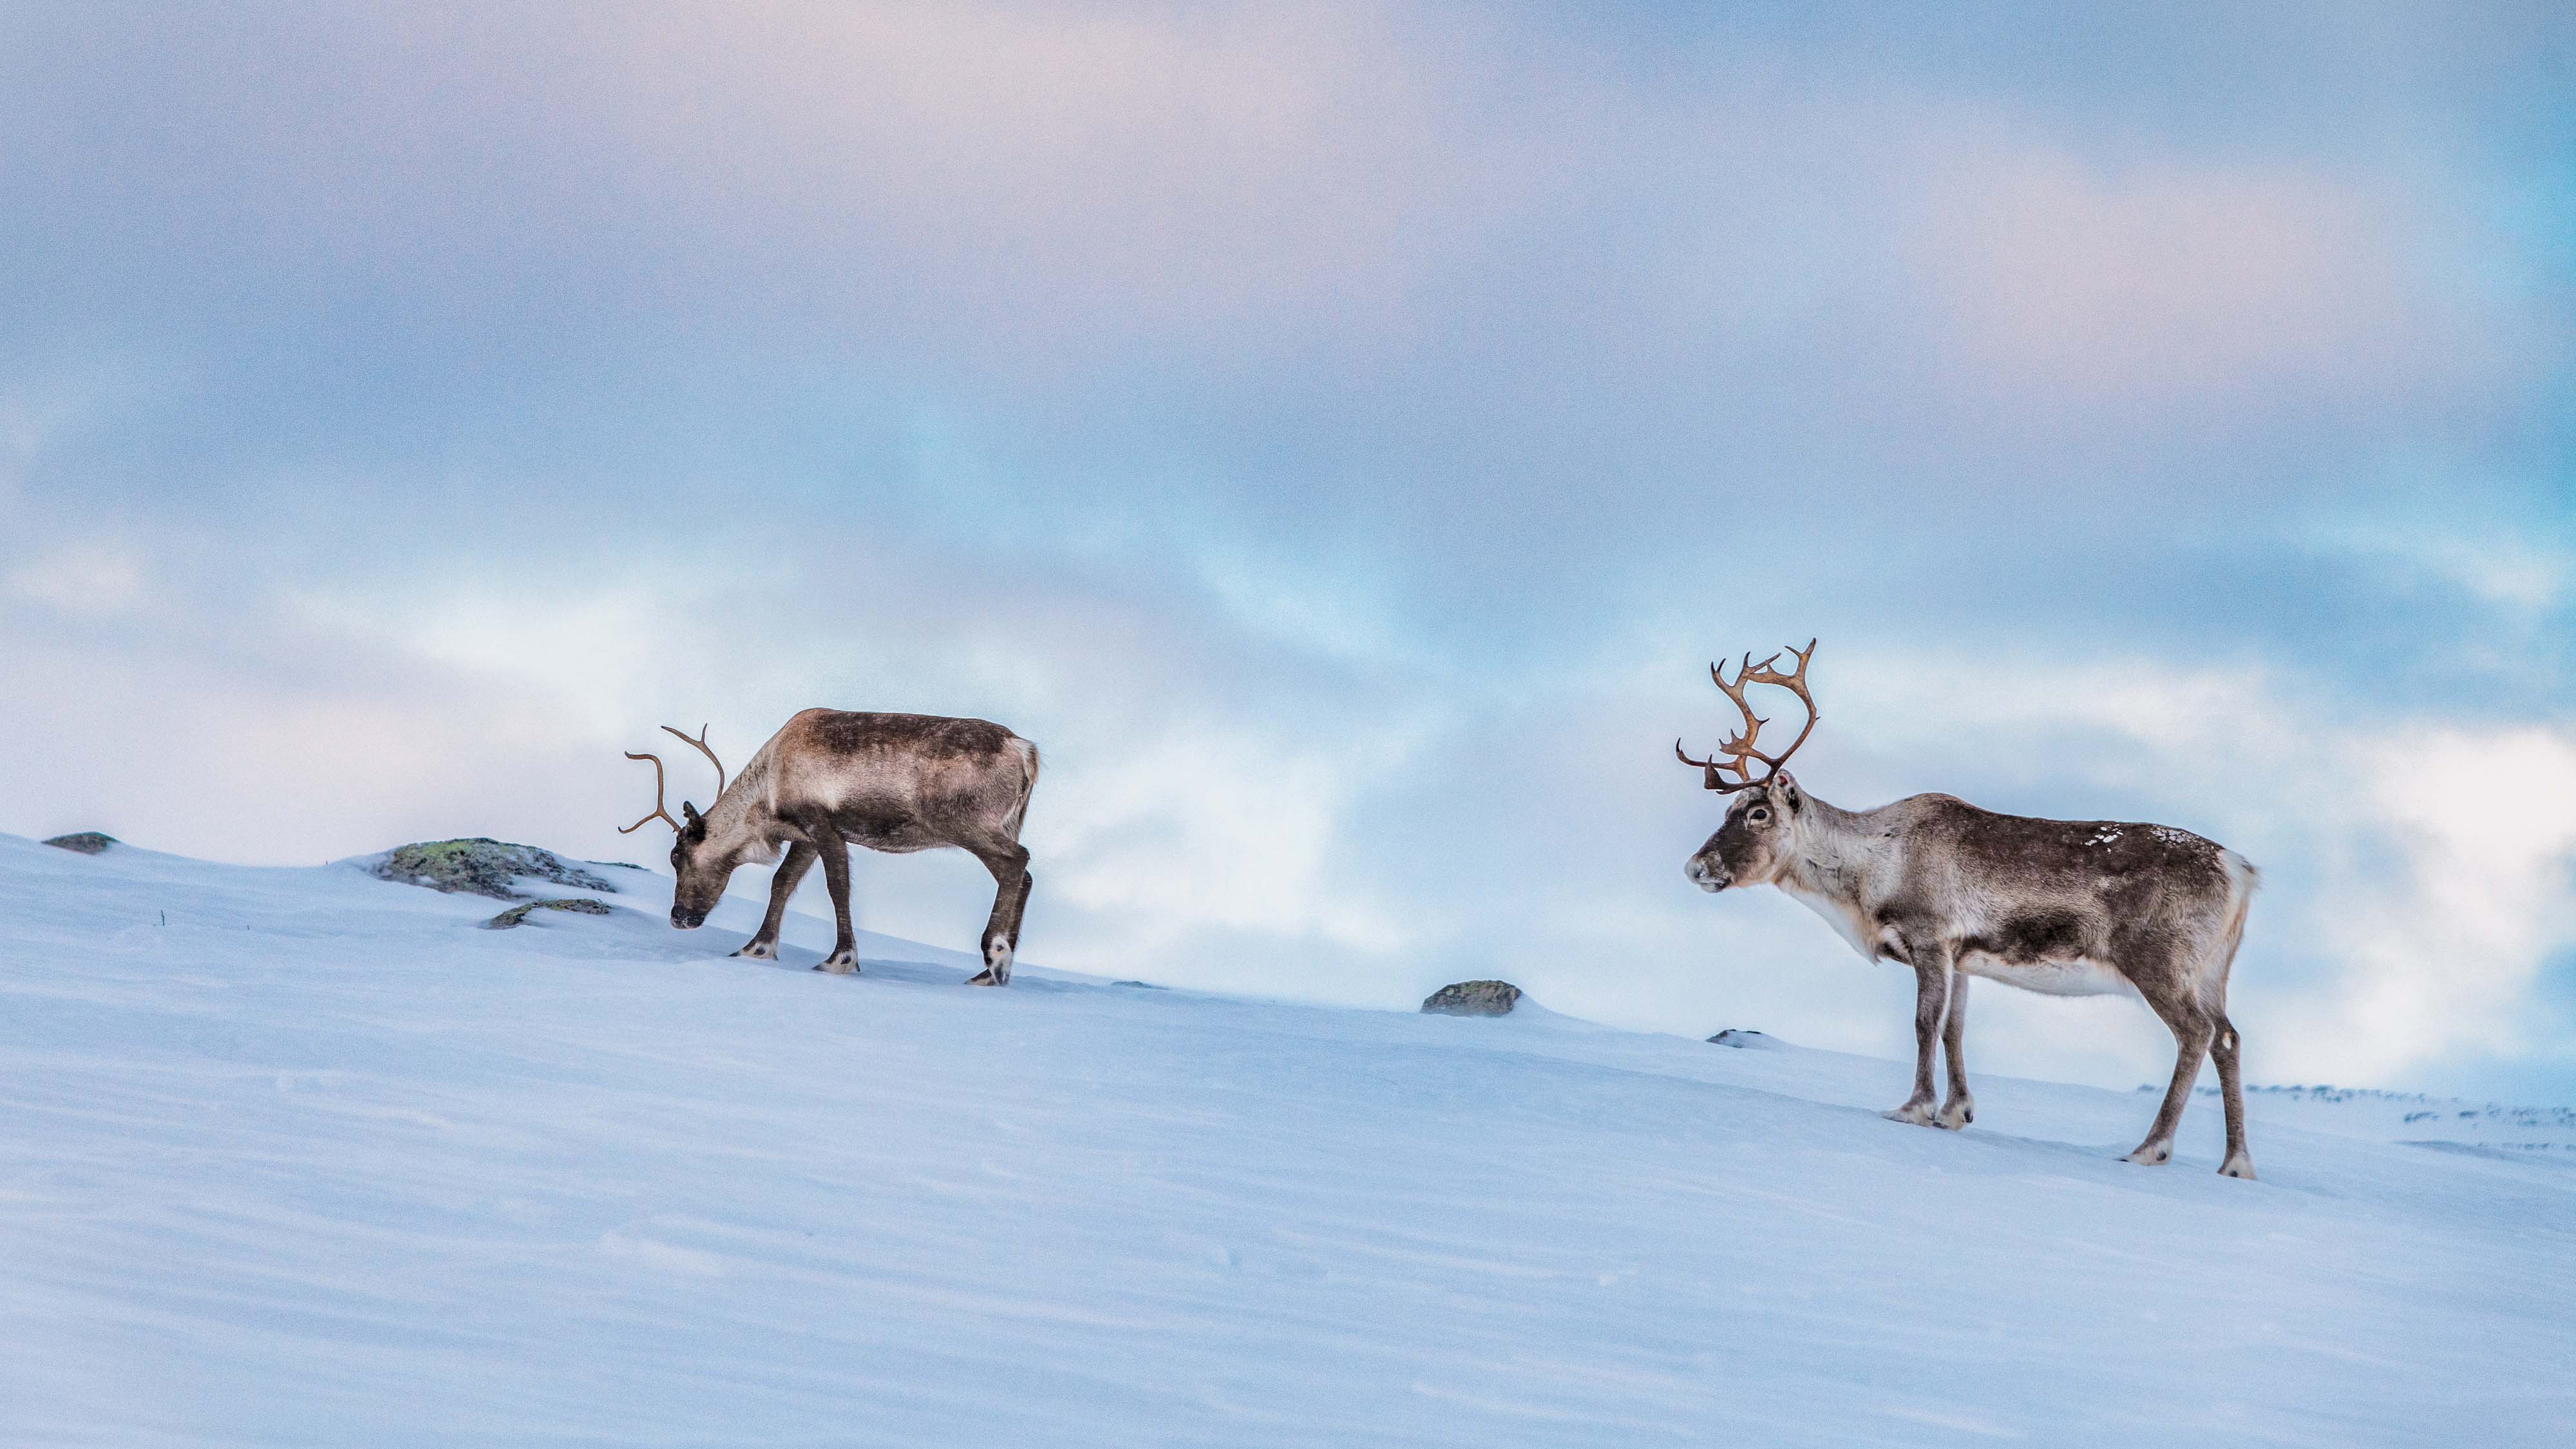 Where can I see a reindeer in Finland? | Visit Finland